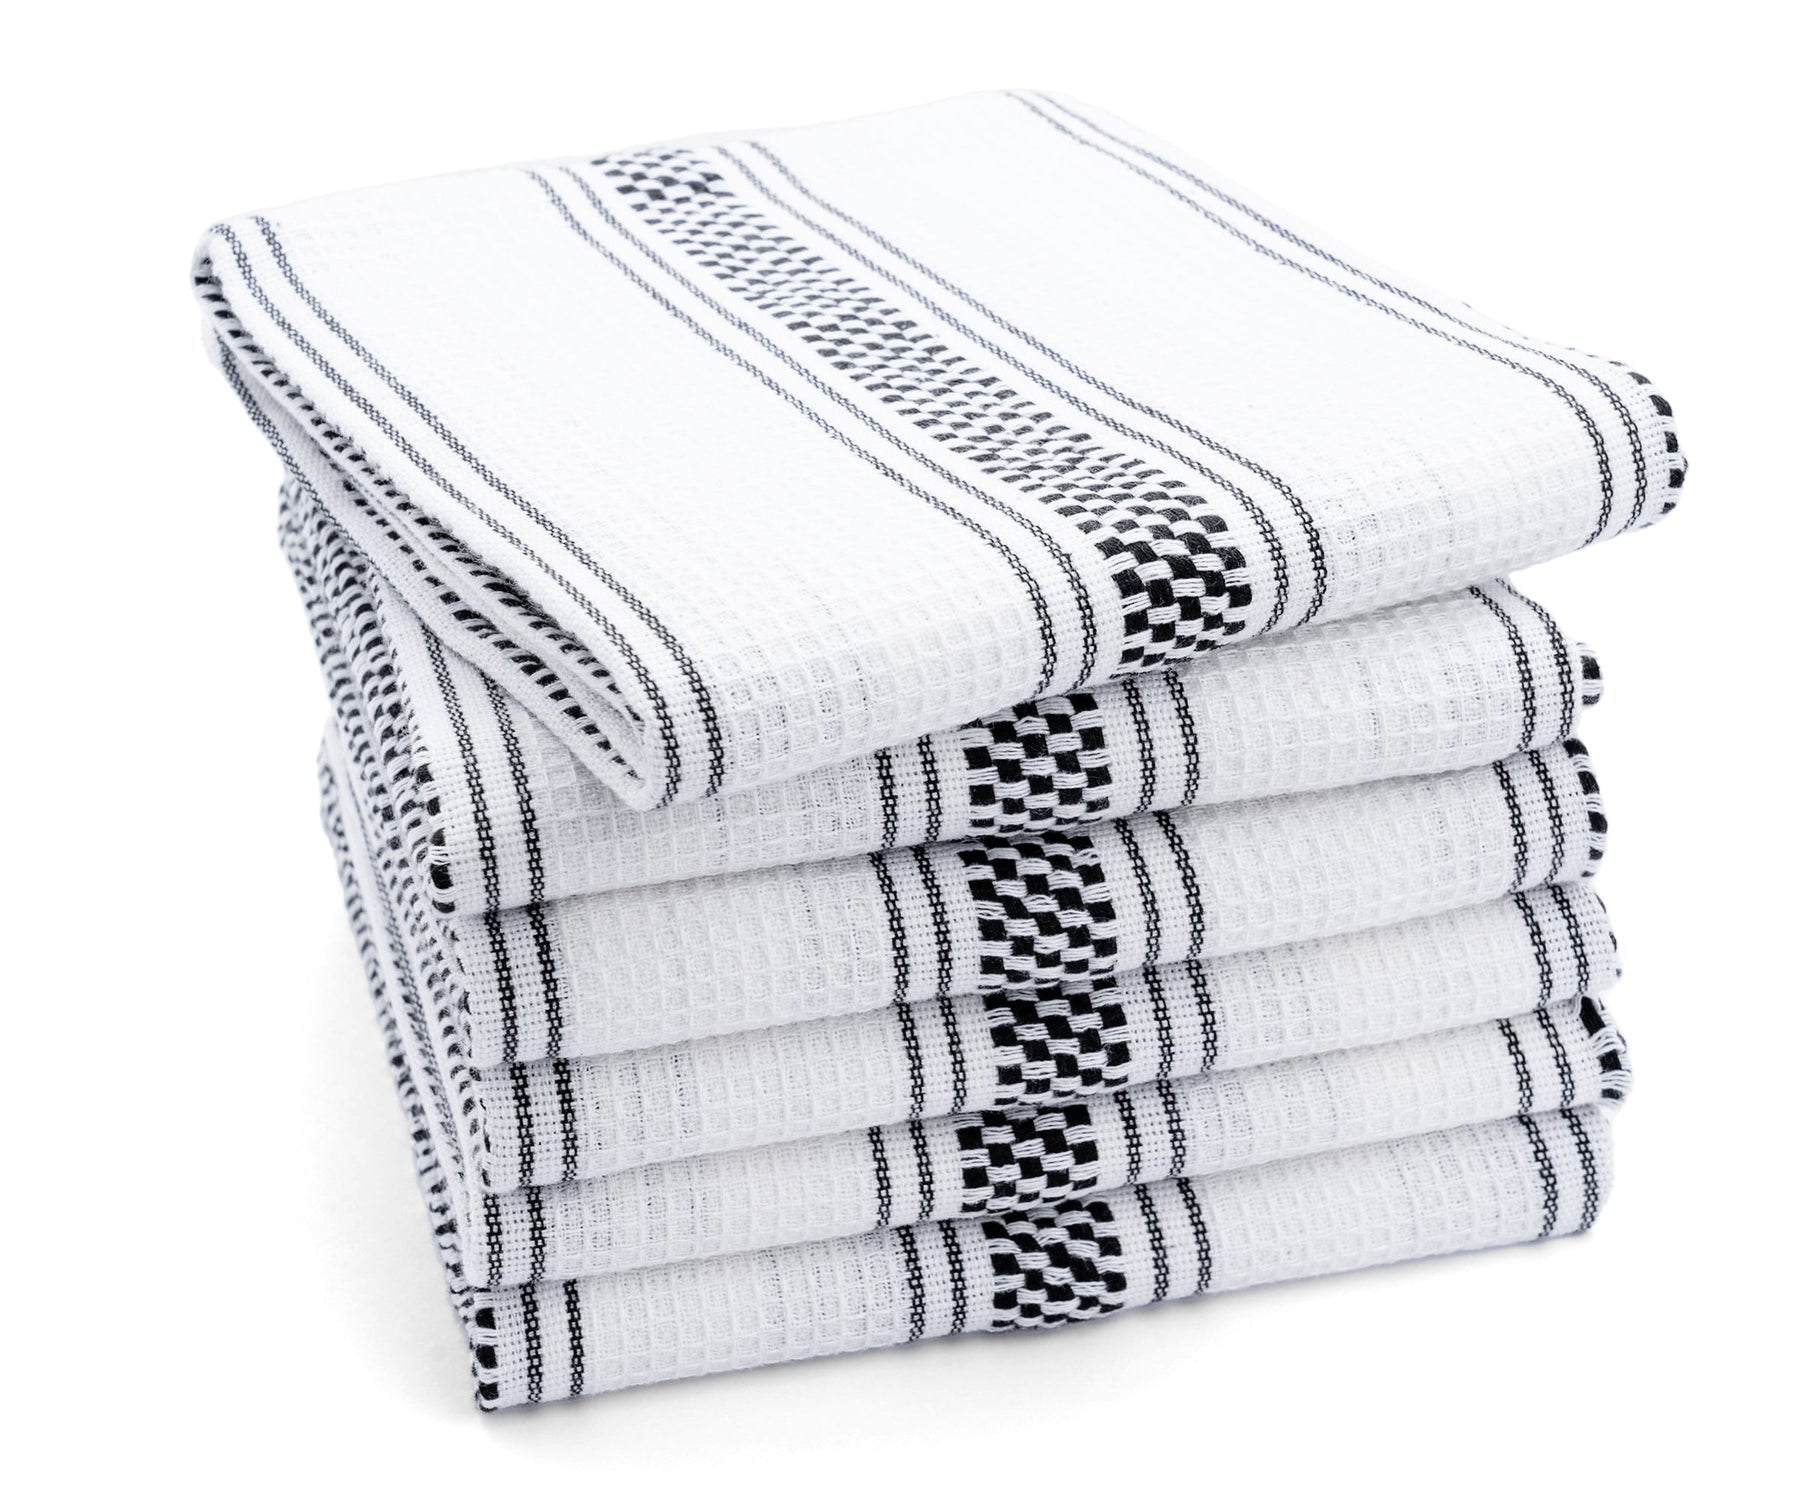  Black and White Kitchen Towels Linen - Black Kitchen Towels -  Farmhouse Dish Towels Striped - Black Cotton Dish Towels, Machine Washable  Hand Towels, Linen Collection Bar Towels - 6 Pack